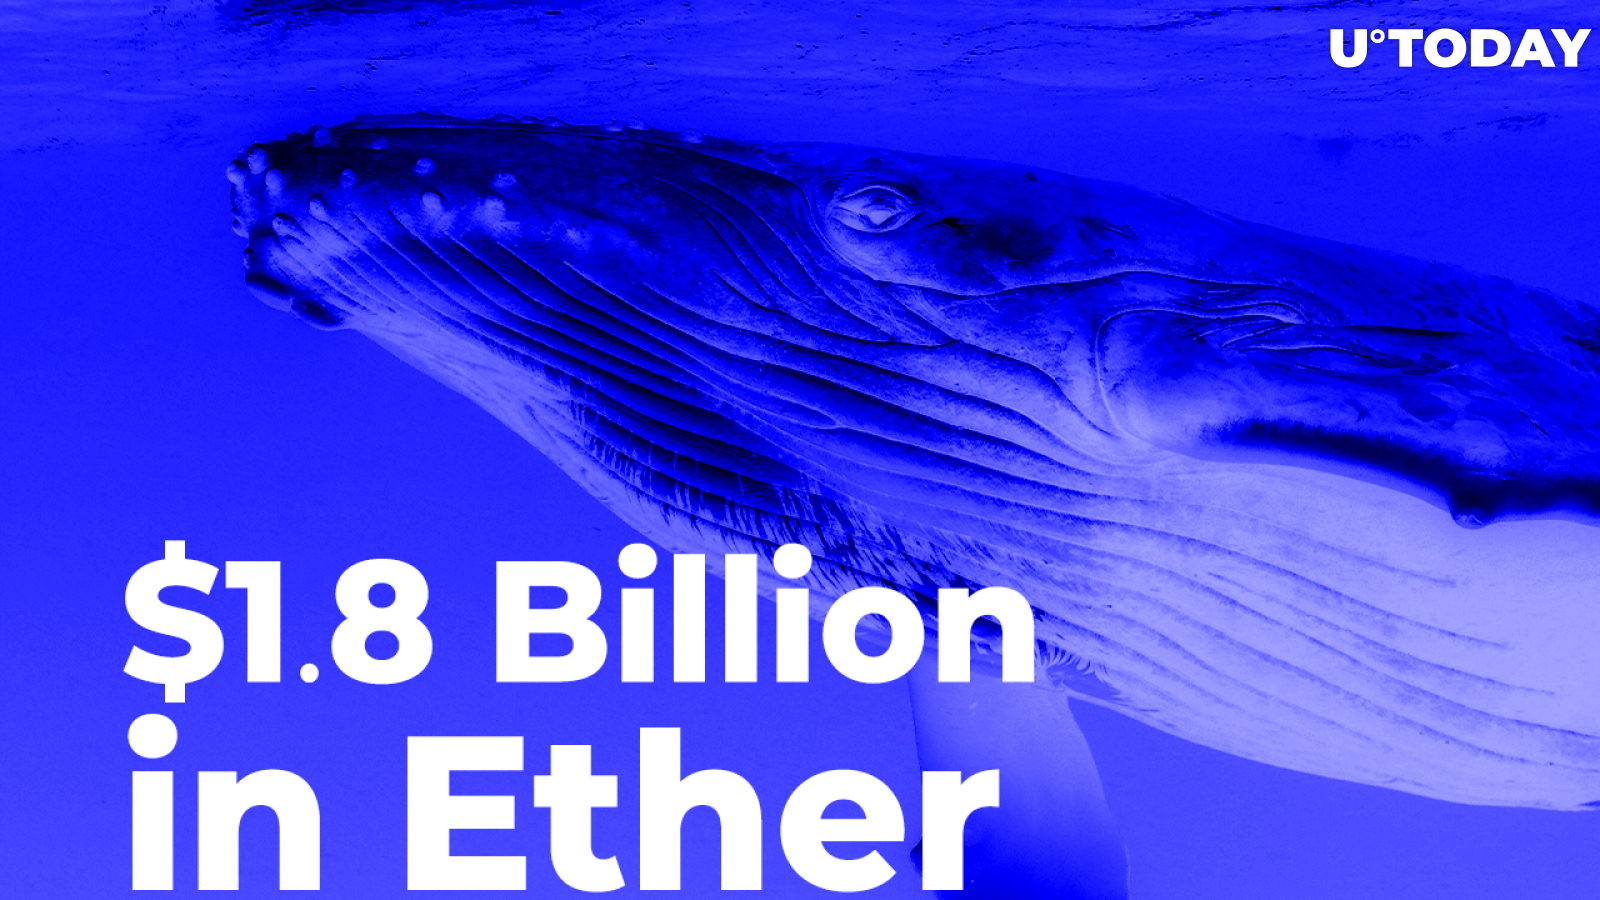 Whales Shovel $1.8 Billion in Ether After Coin Hits New All-Time High